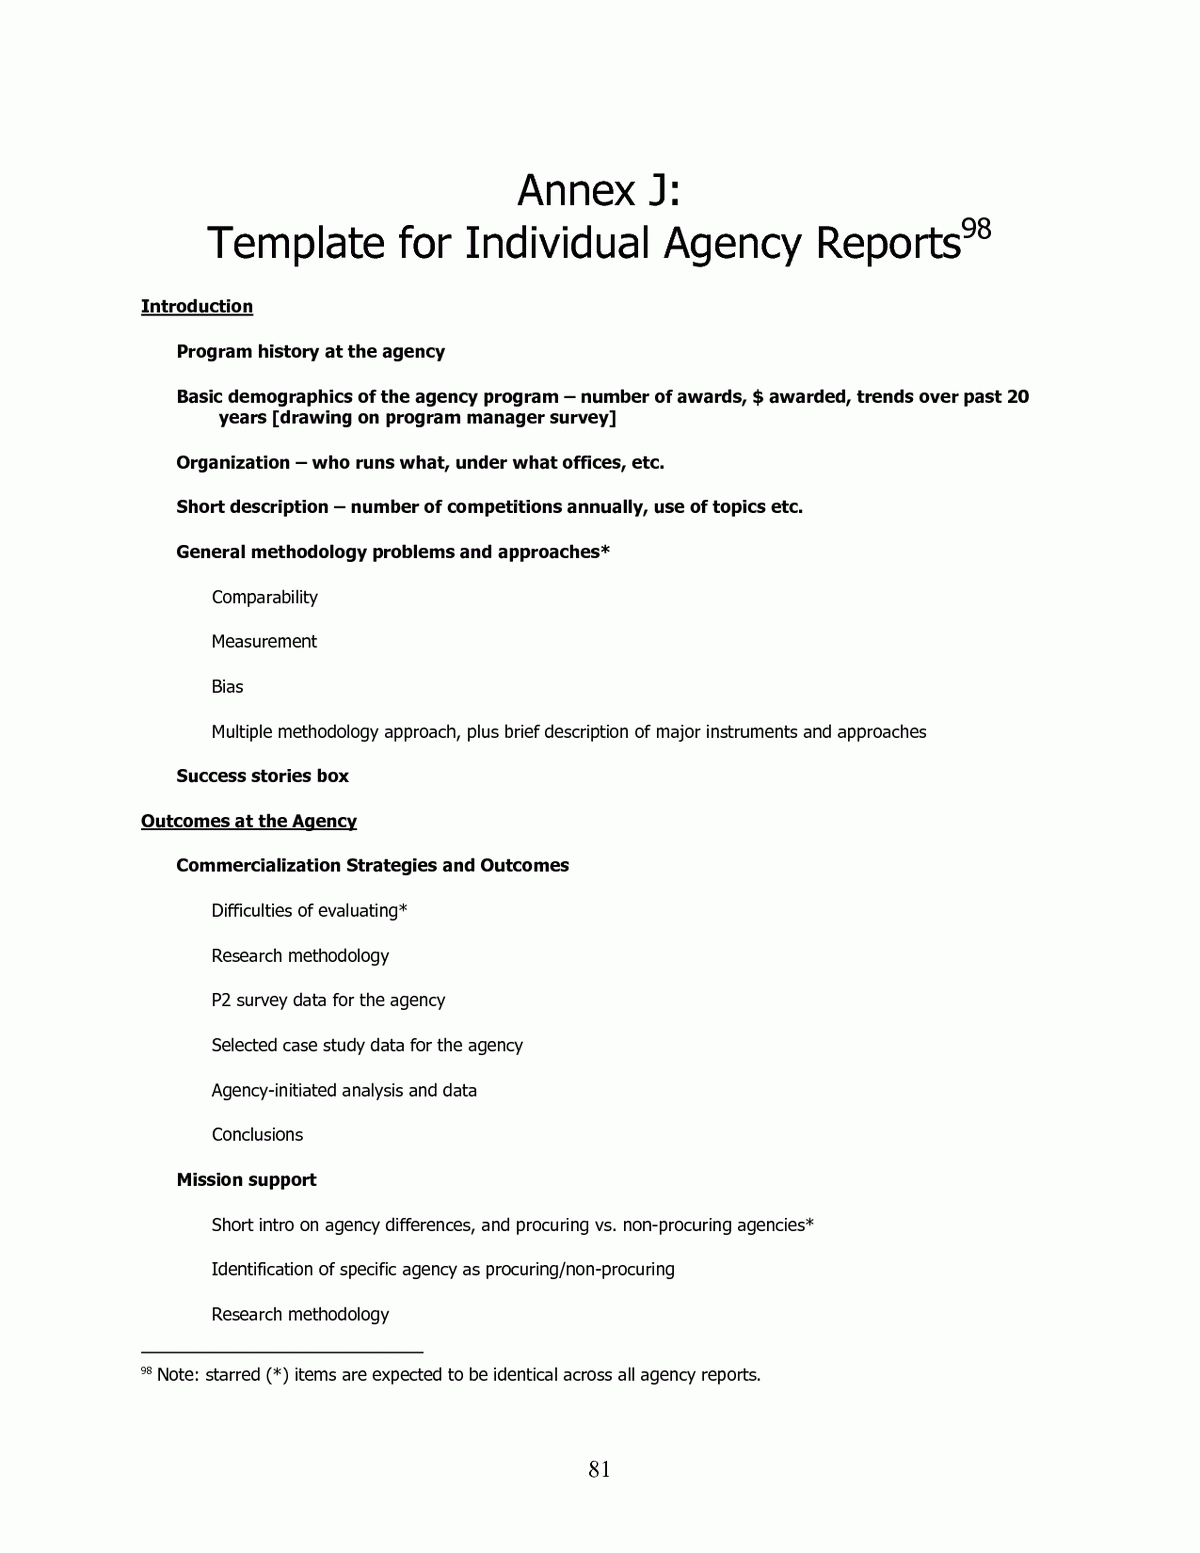 Annex J Template For Individual Agency Reports | An Intended For Research Project Report Template